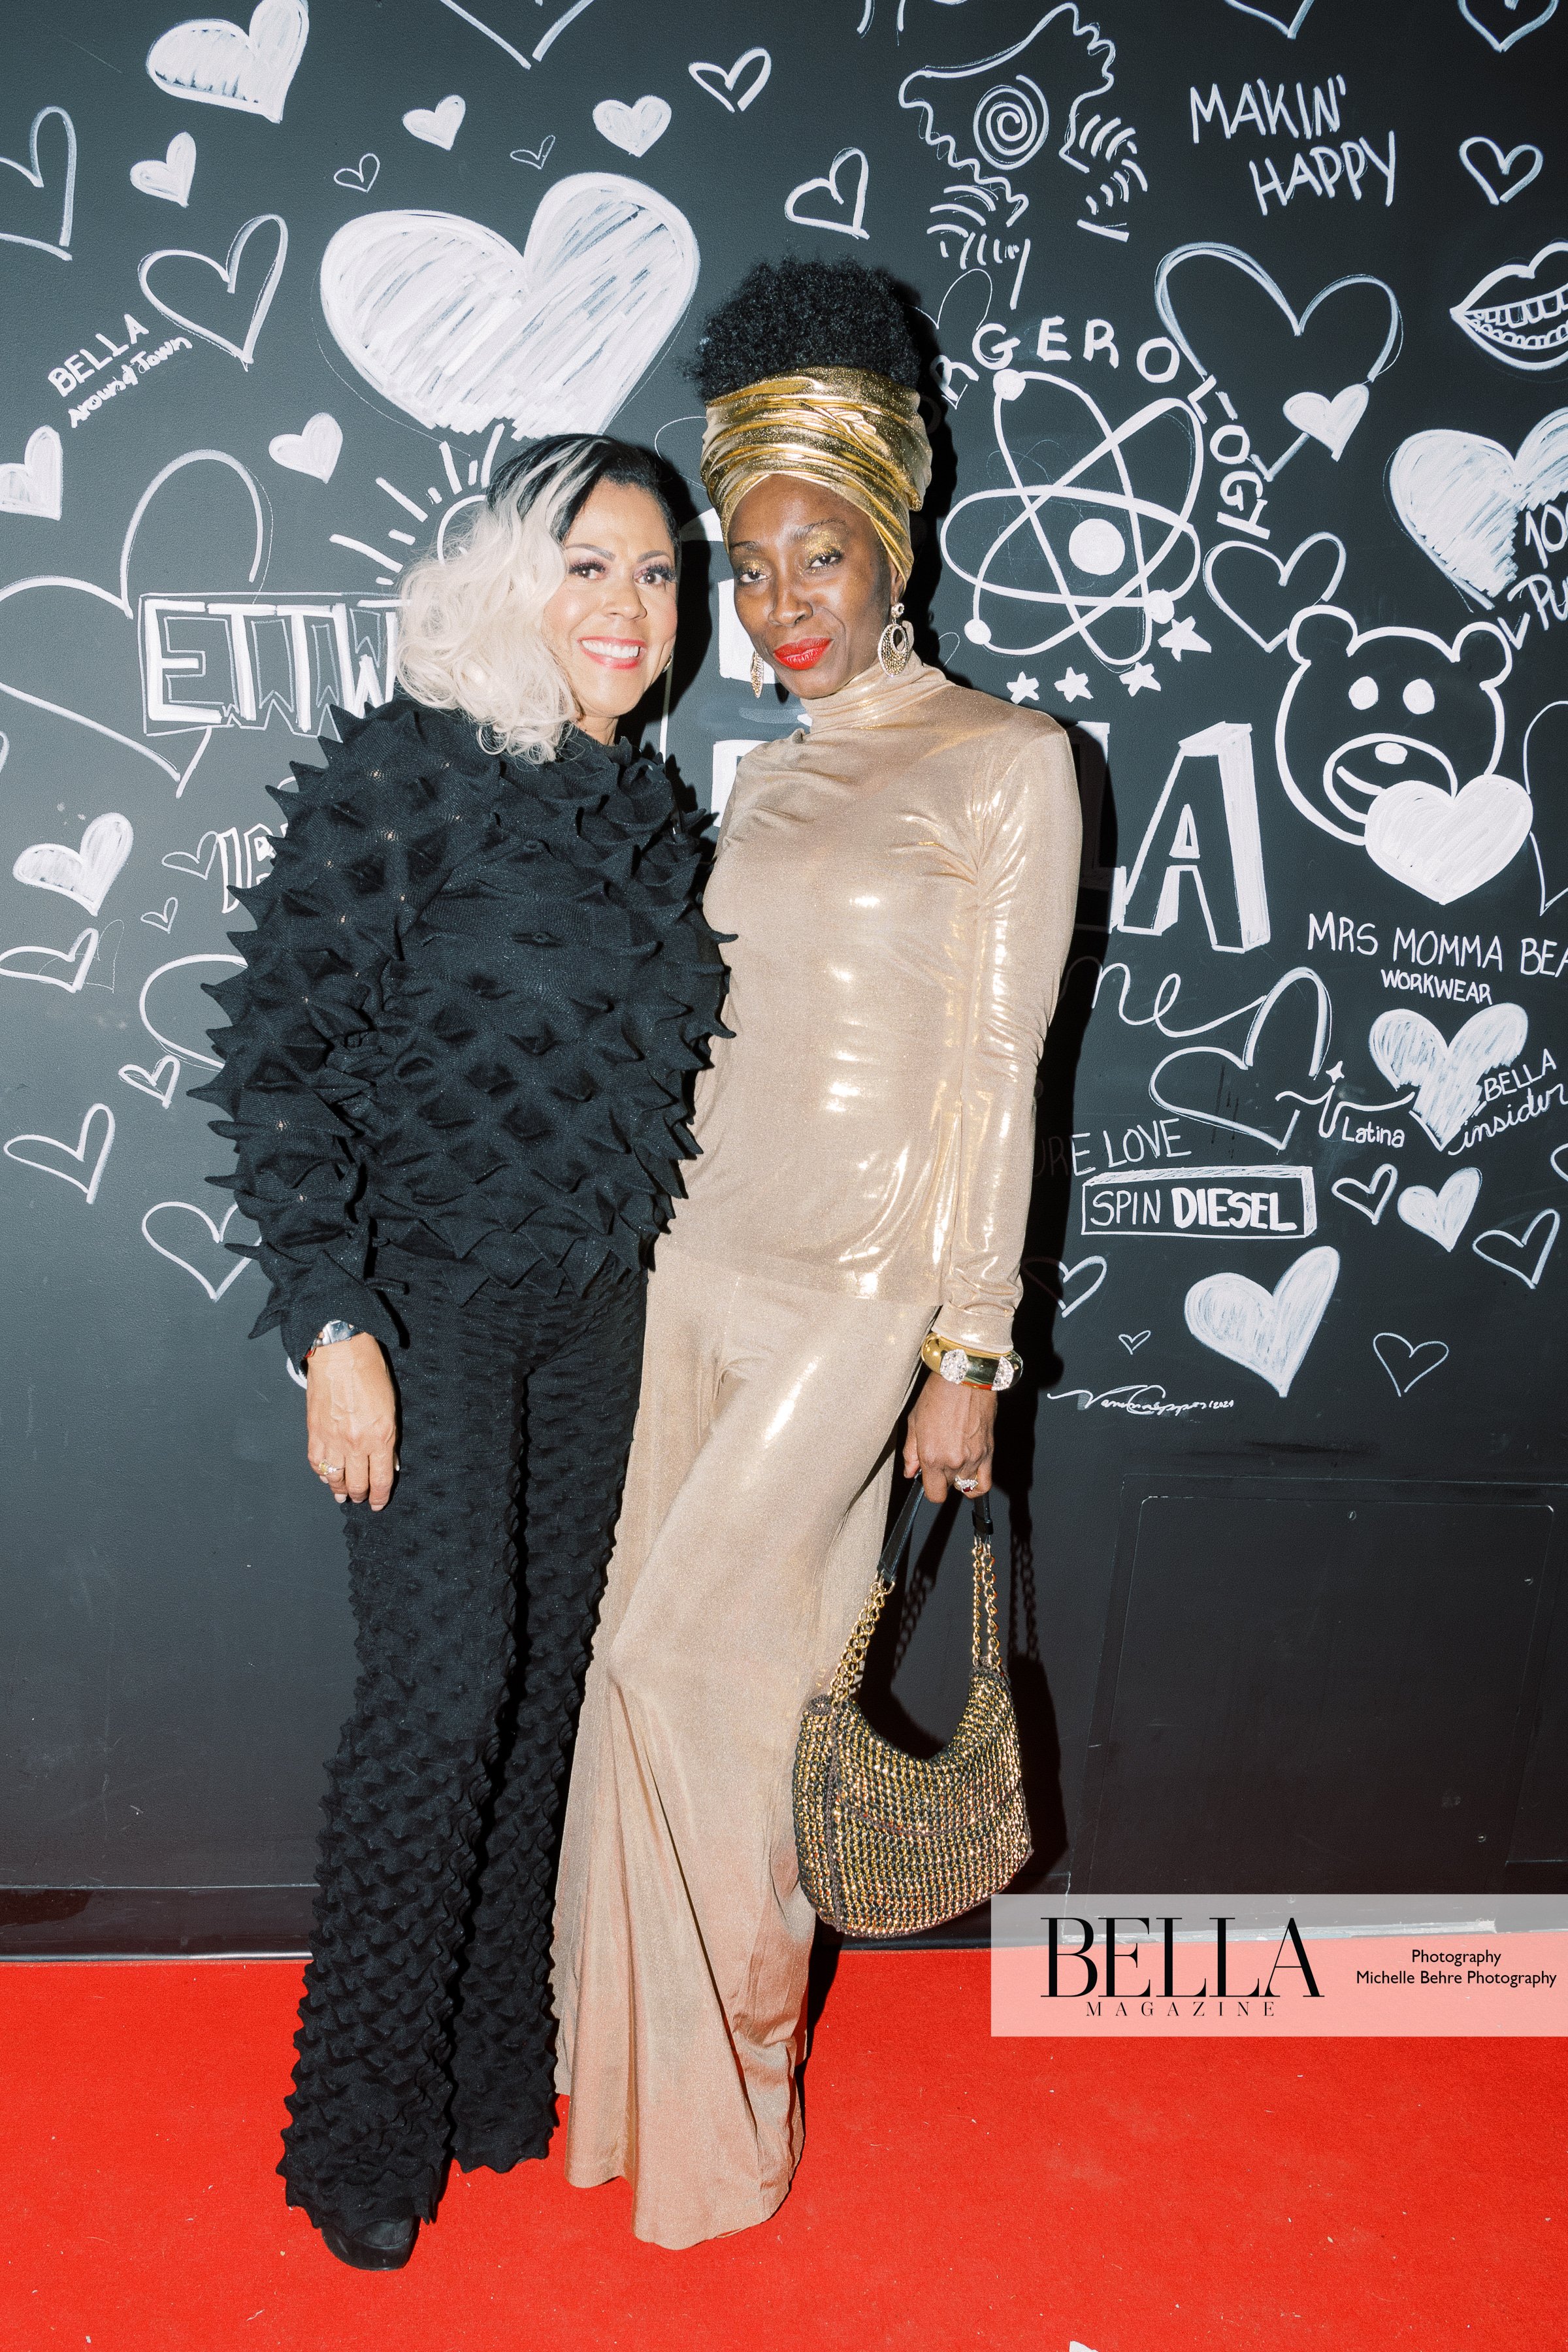 Michelle-Behre-Creative-Co-BELLA-Magazine-Women-of-Influence-Cover-Party-Burgerology-192.jpg